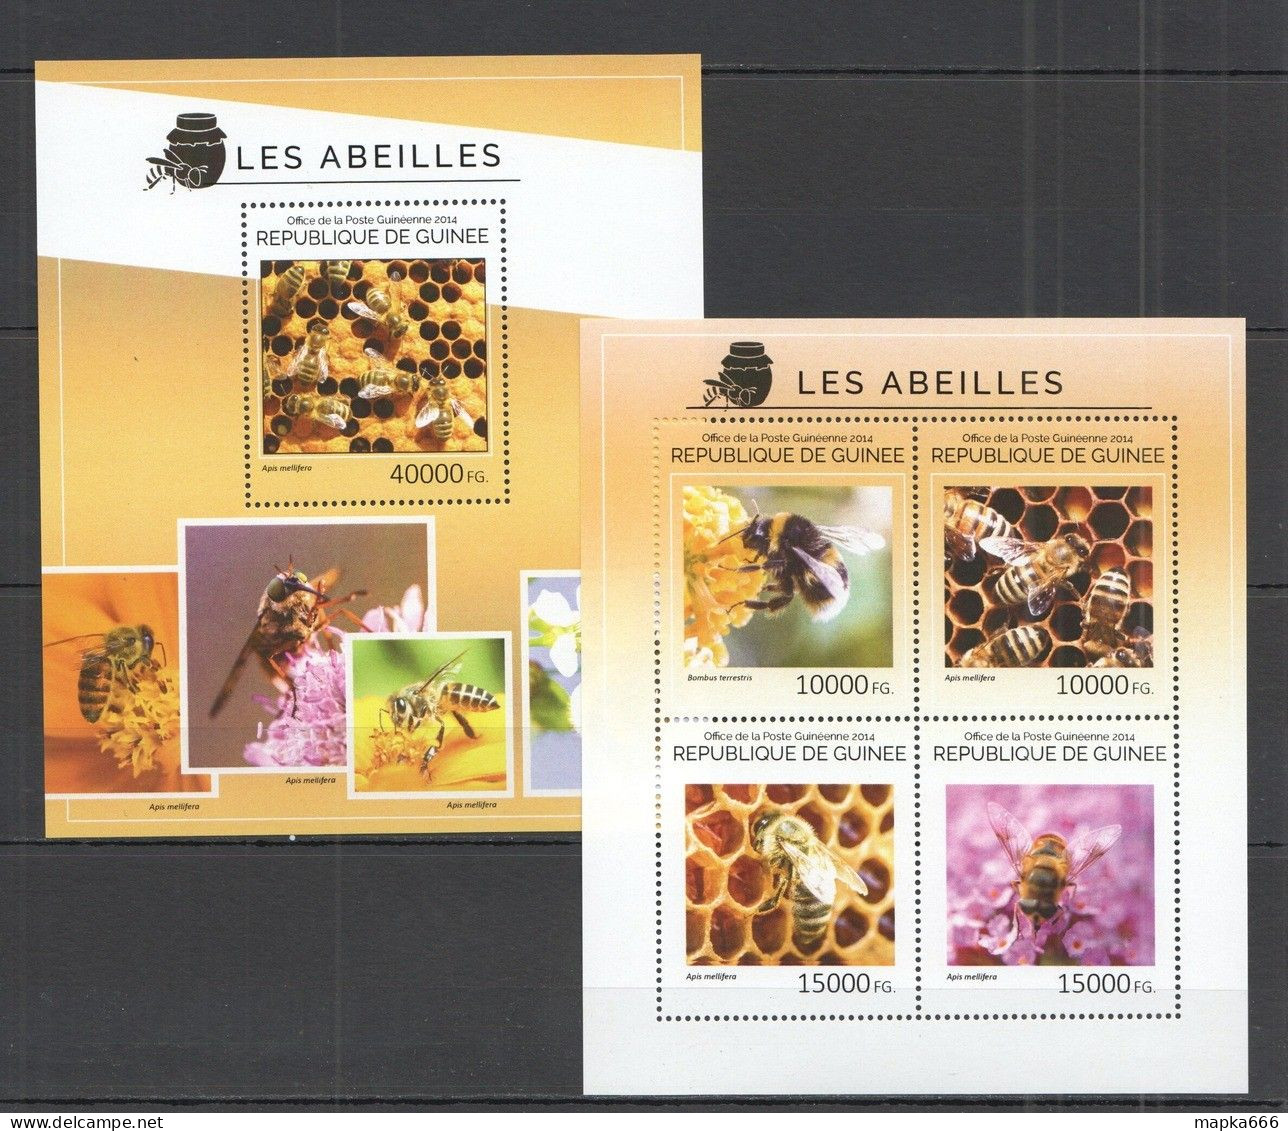 St717 2014 Guinea Fauna Insects Honey Bees Abeilles Kb+Bl Mnh Stamps - Abejas